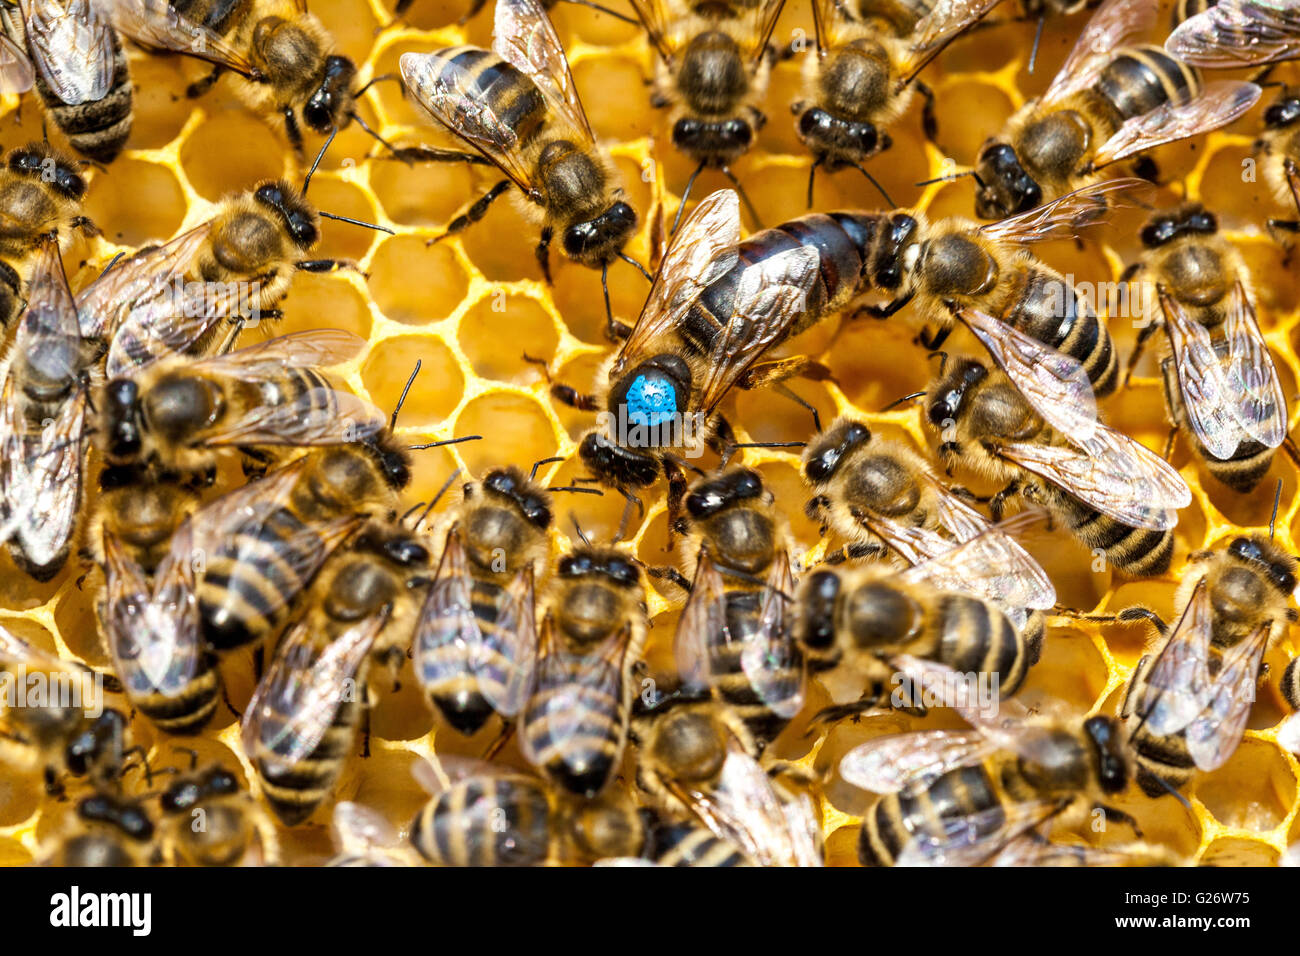 European Honey bee Queen, marked and surrounded by worker bees, beehive bees Apis mellifera Stock Photo